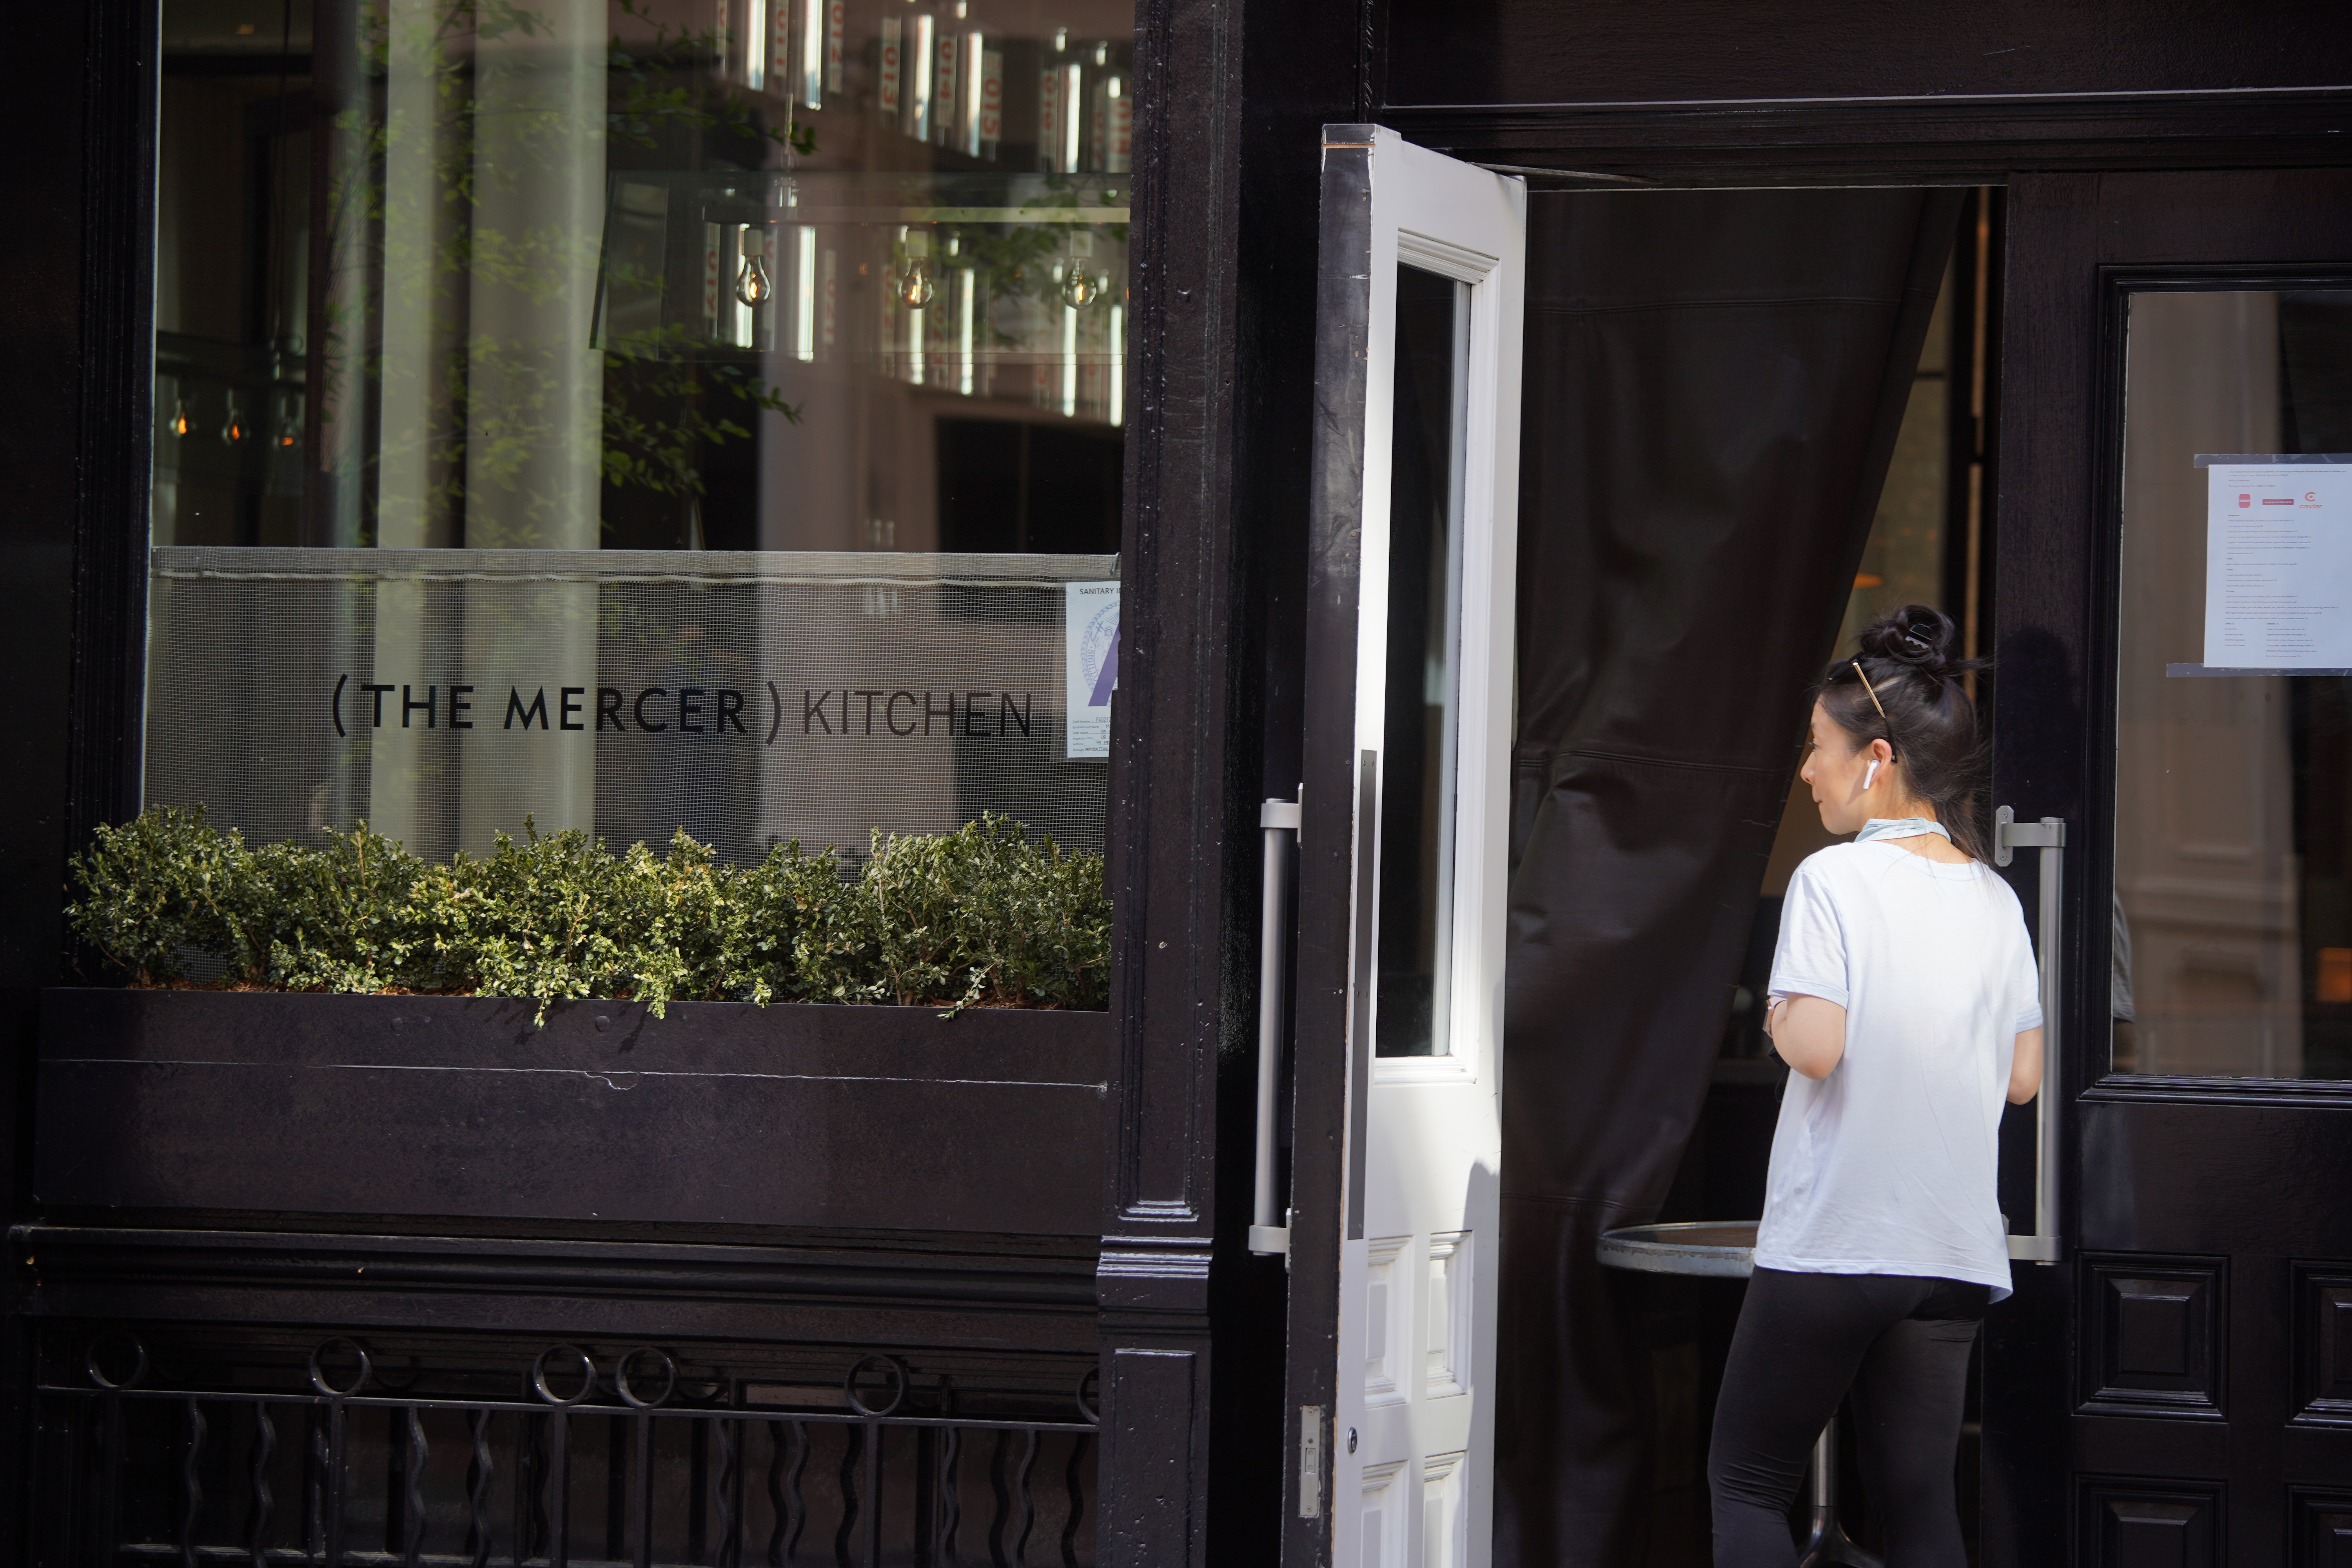 A person stands outside the Mercer Kitchen in the Soho section of Manhattan.